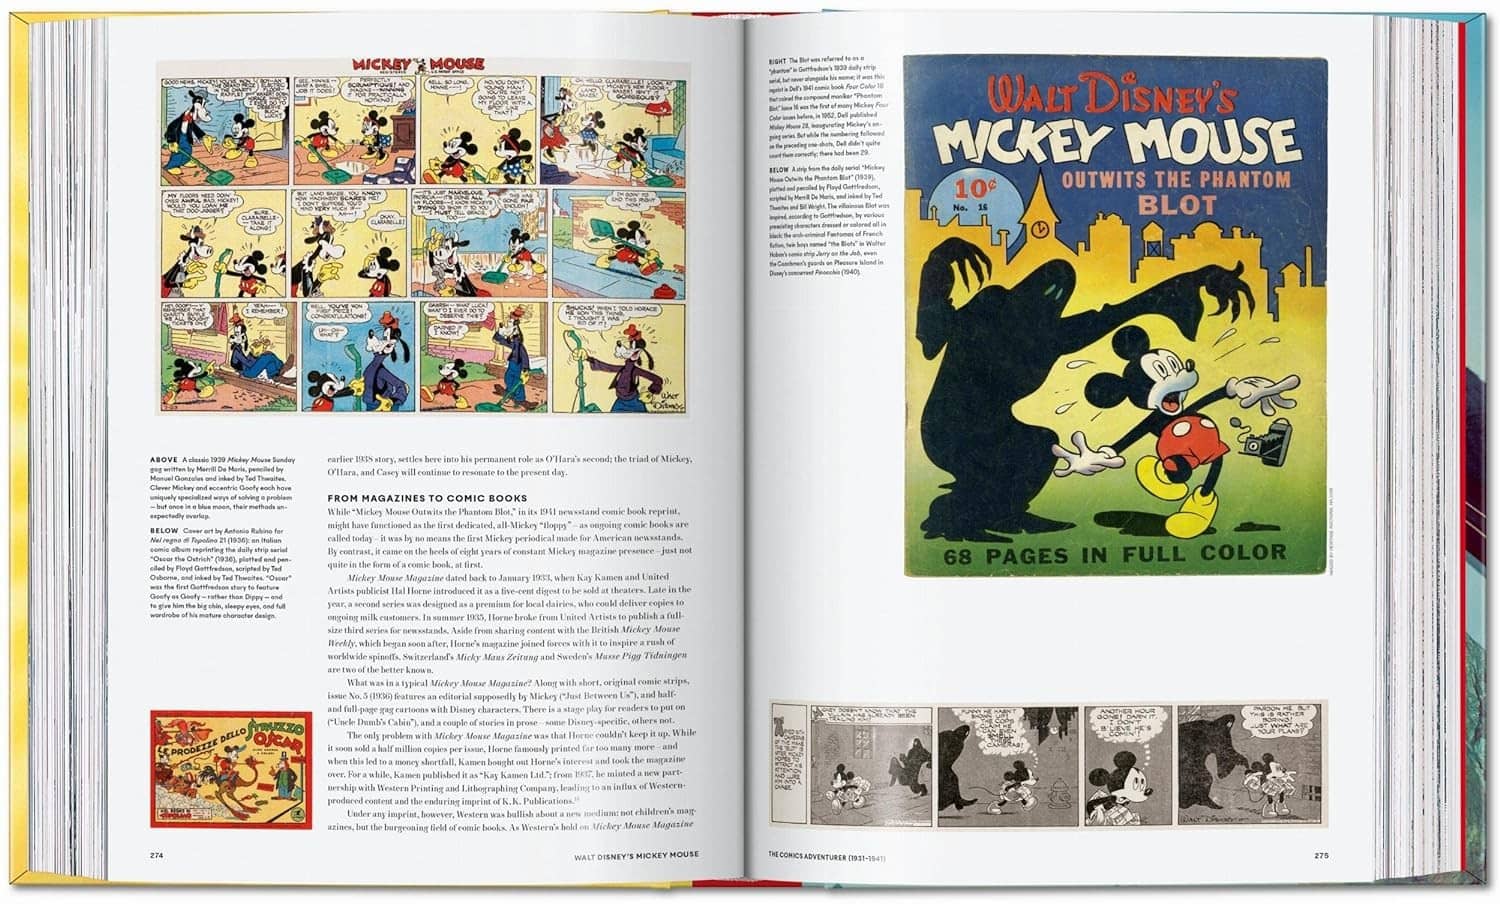 17424-walt-disney-s-mickey-mouse-the-ultimate-history-91gqrpvzsol-sl1500